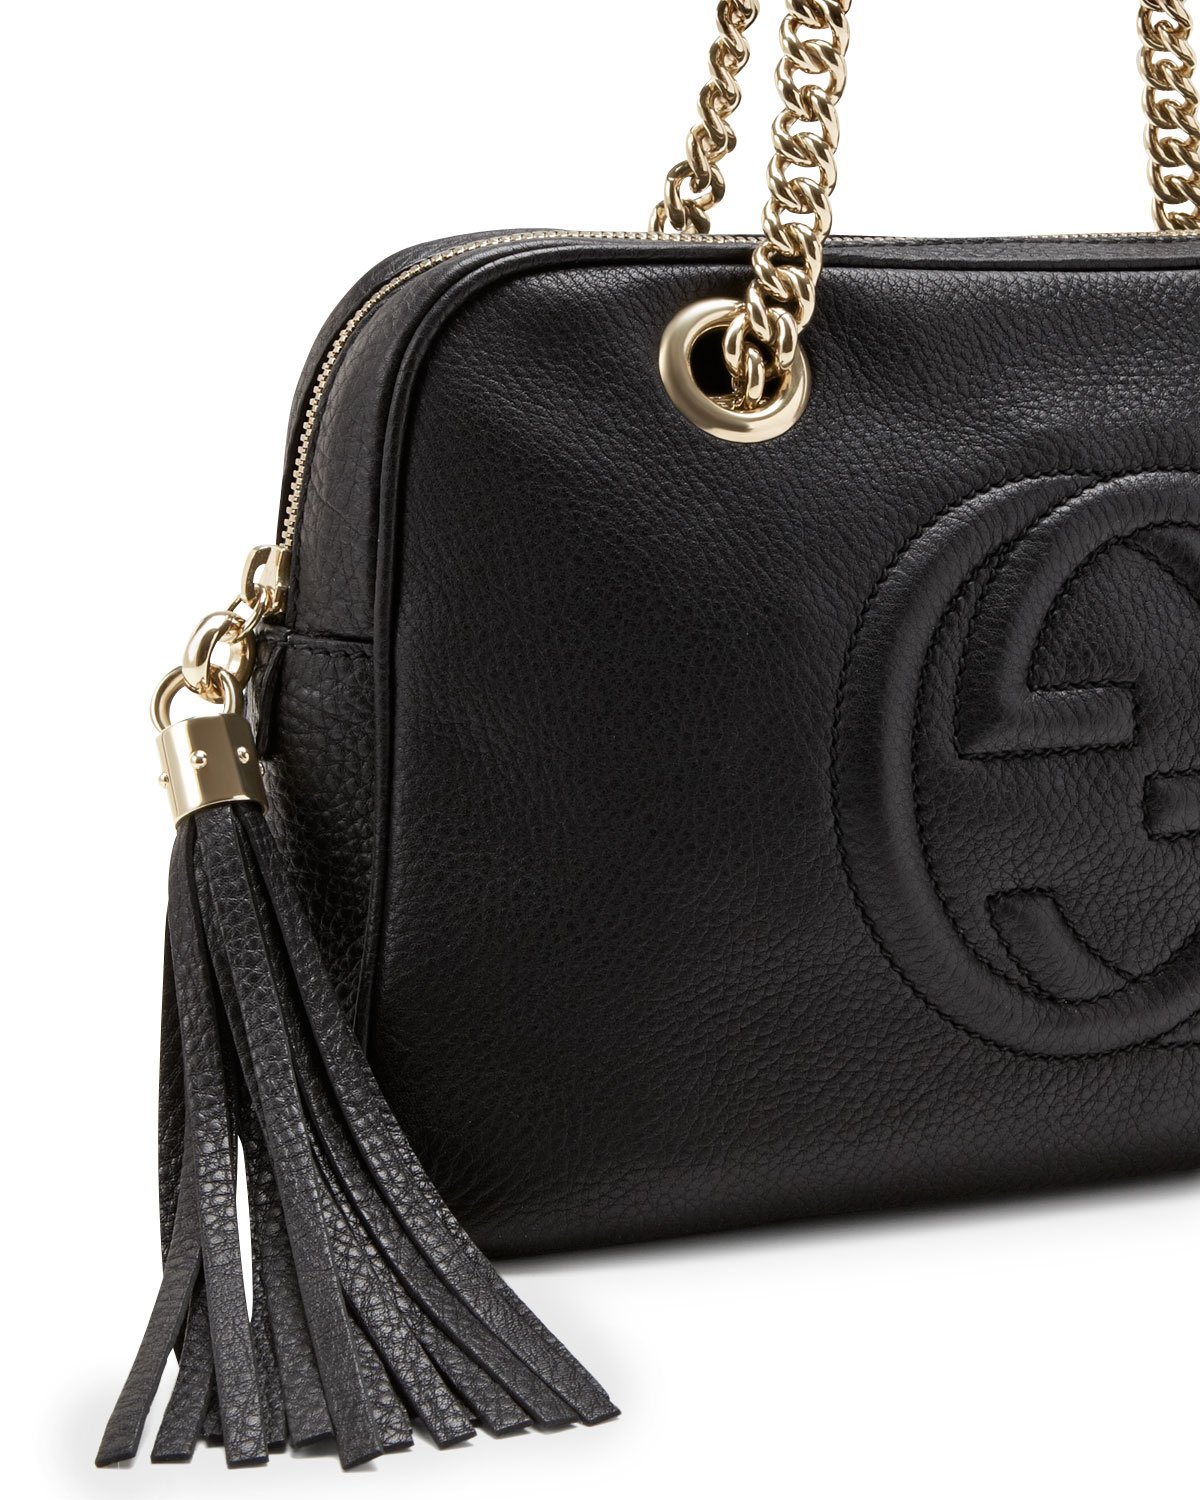 Gucci Soho Leather Doublechainstrap Shoulder Bag in Black - Lyst